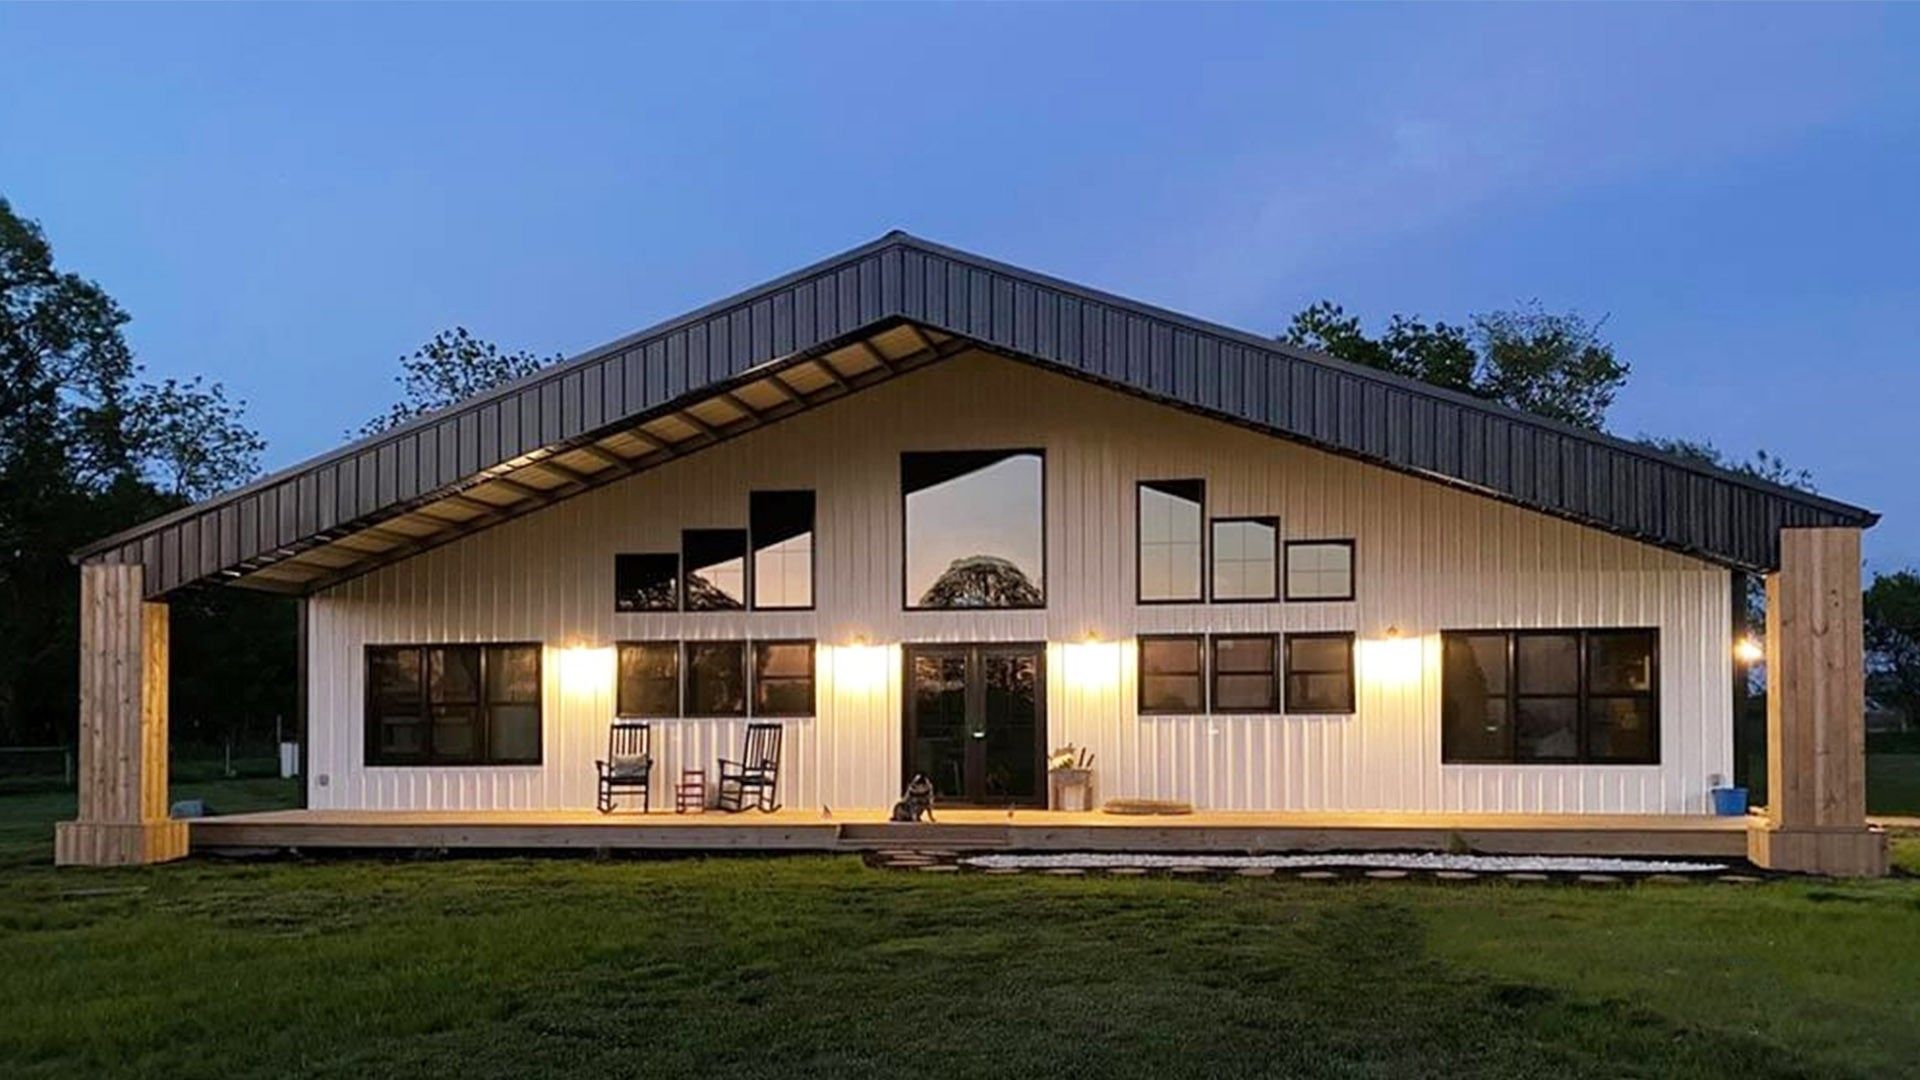 Barndominiums: The Country-Forward Home Trend Combining Barn & Condo Features